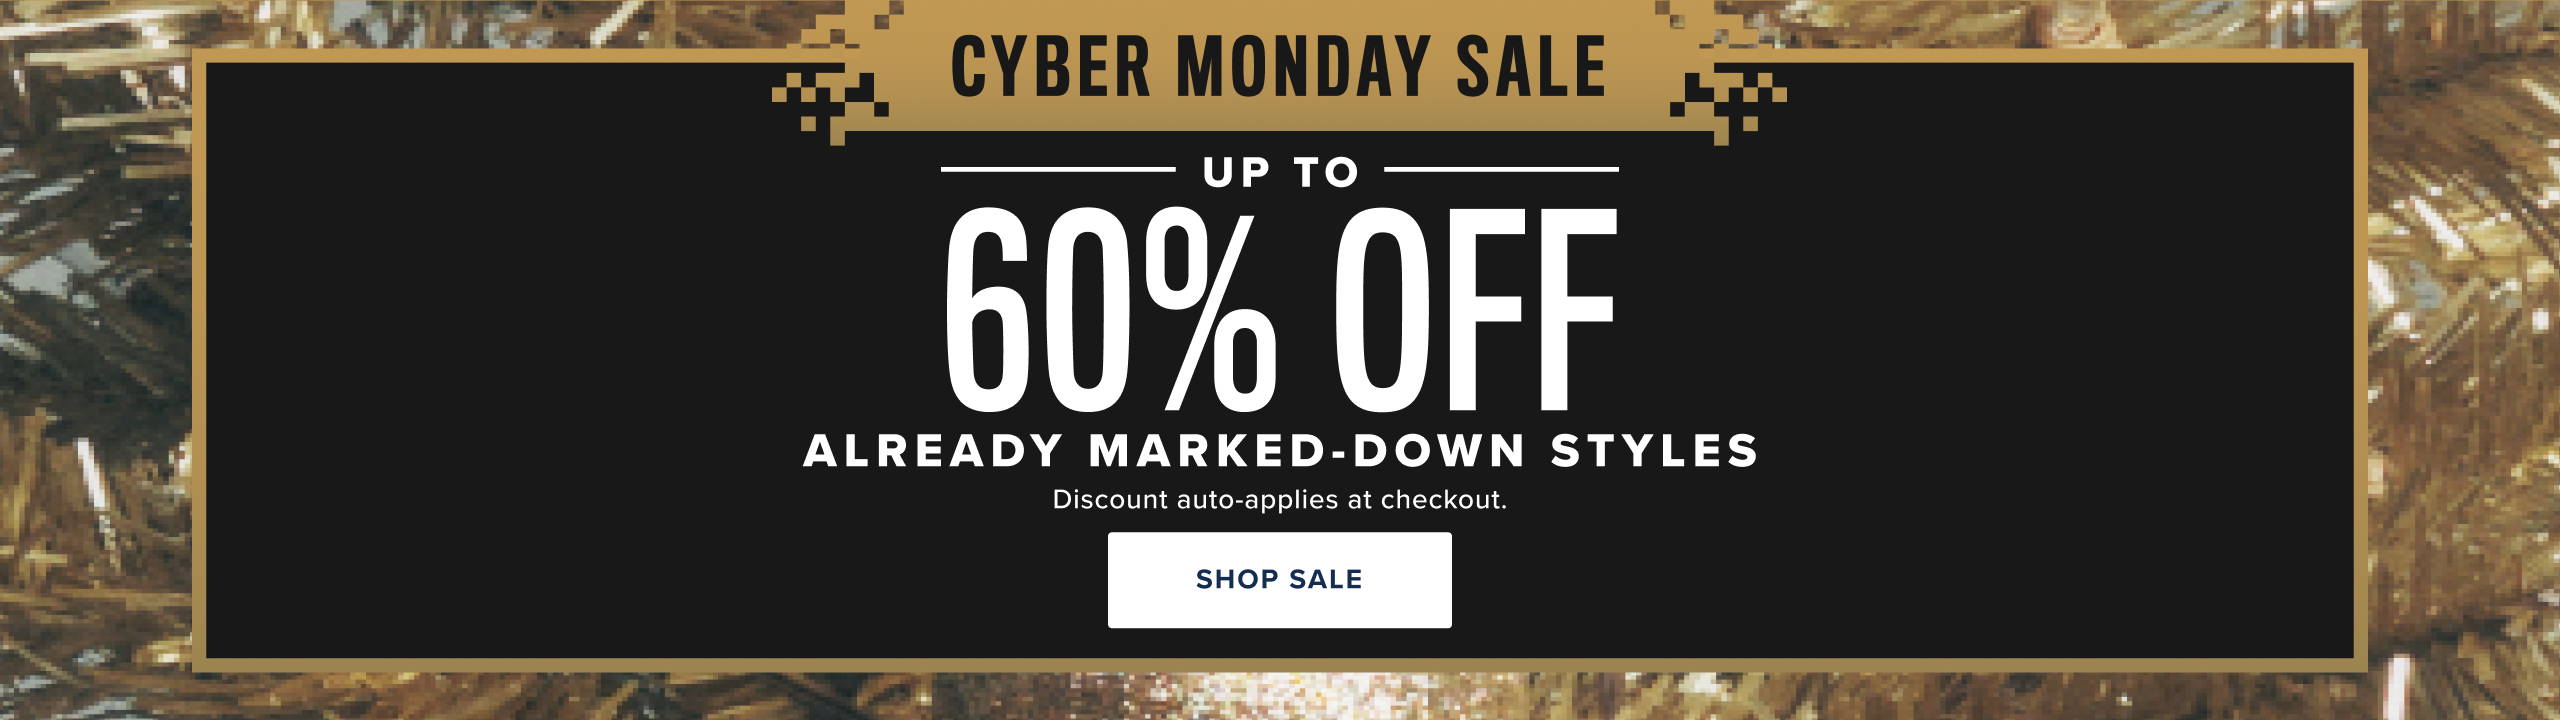  Cyber Monday Sale. Up To 60% Off. Discont auto-applies at checkout.